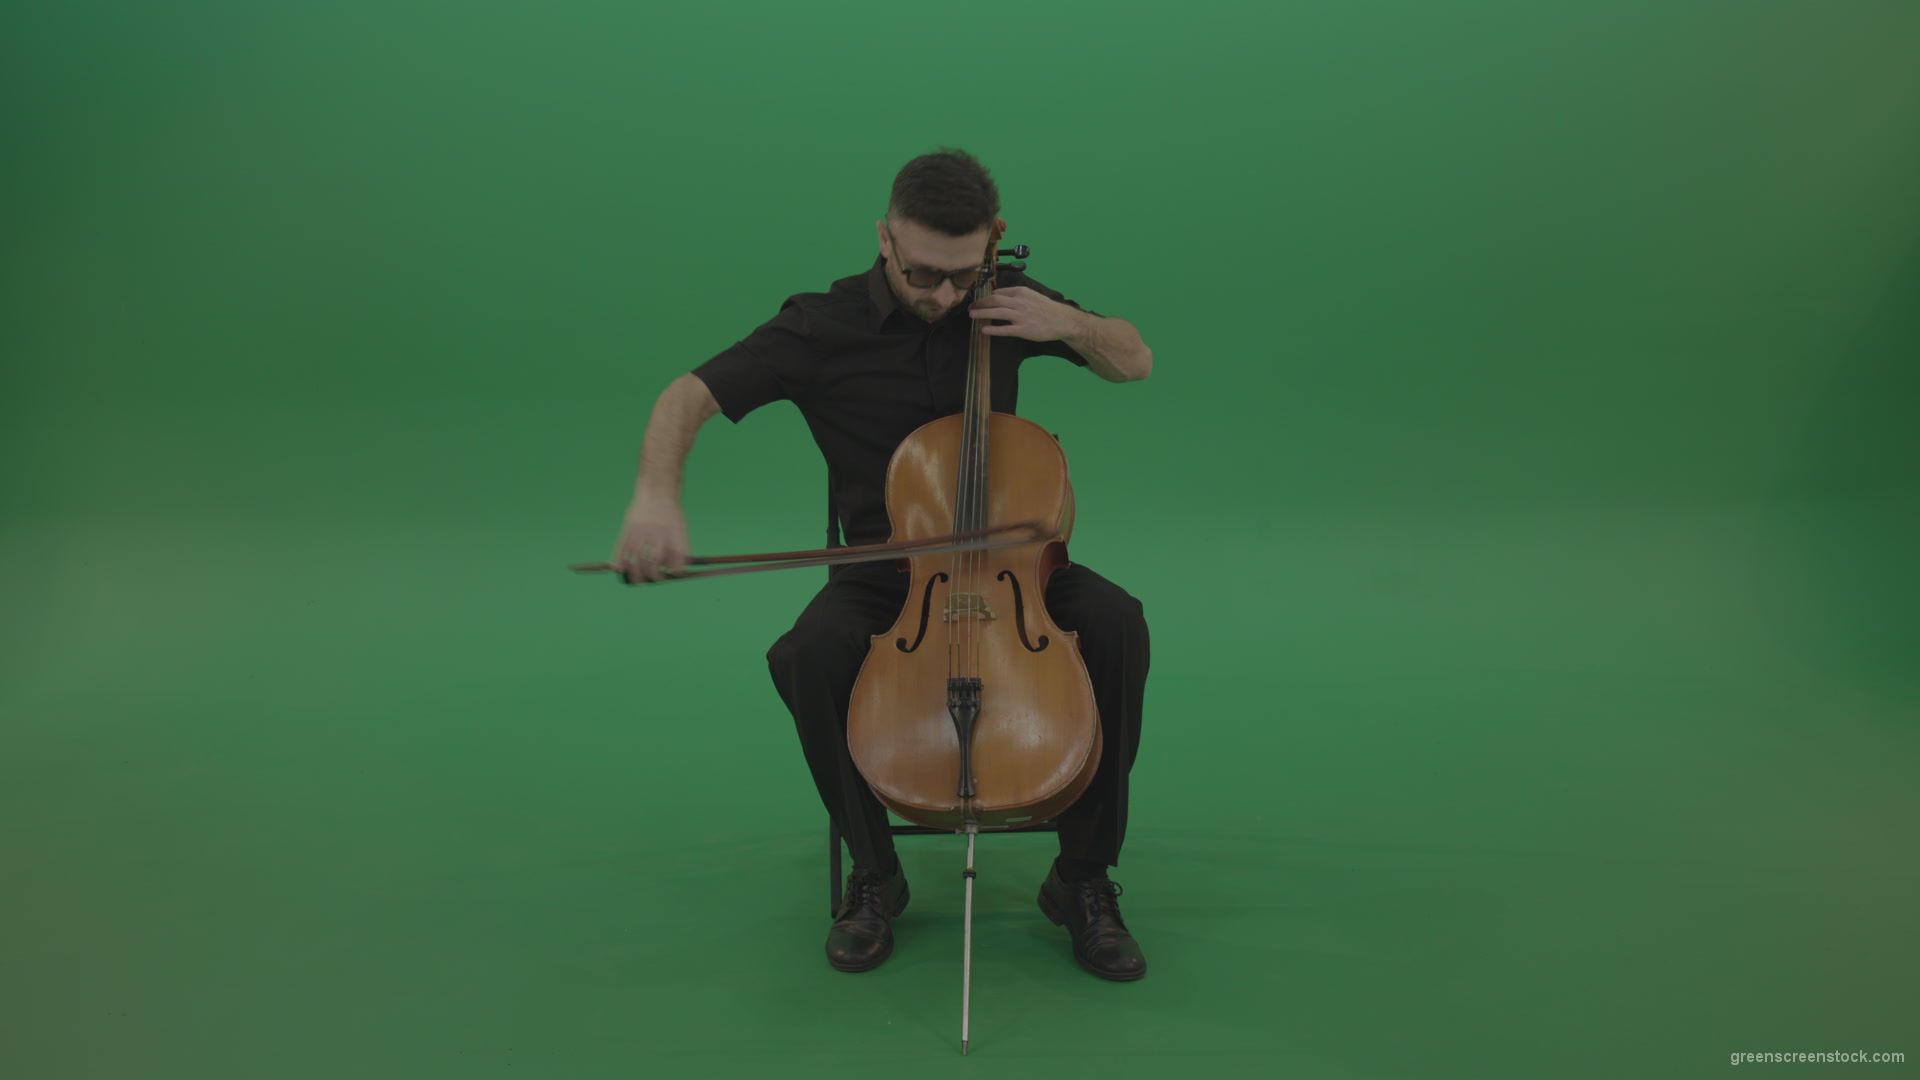 Man-in-black-playing-fast-violoncello-cello-strings-music-instrument-isolated-on-green-screen_007 Green Screen Stock